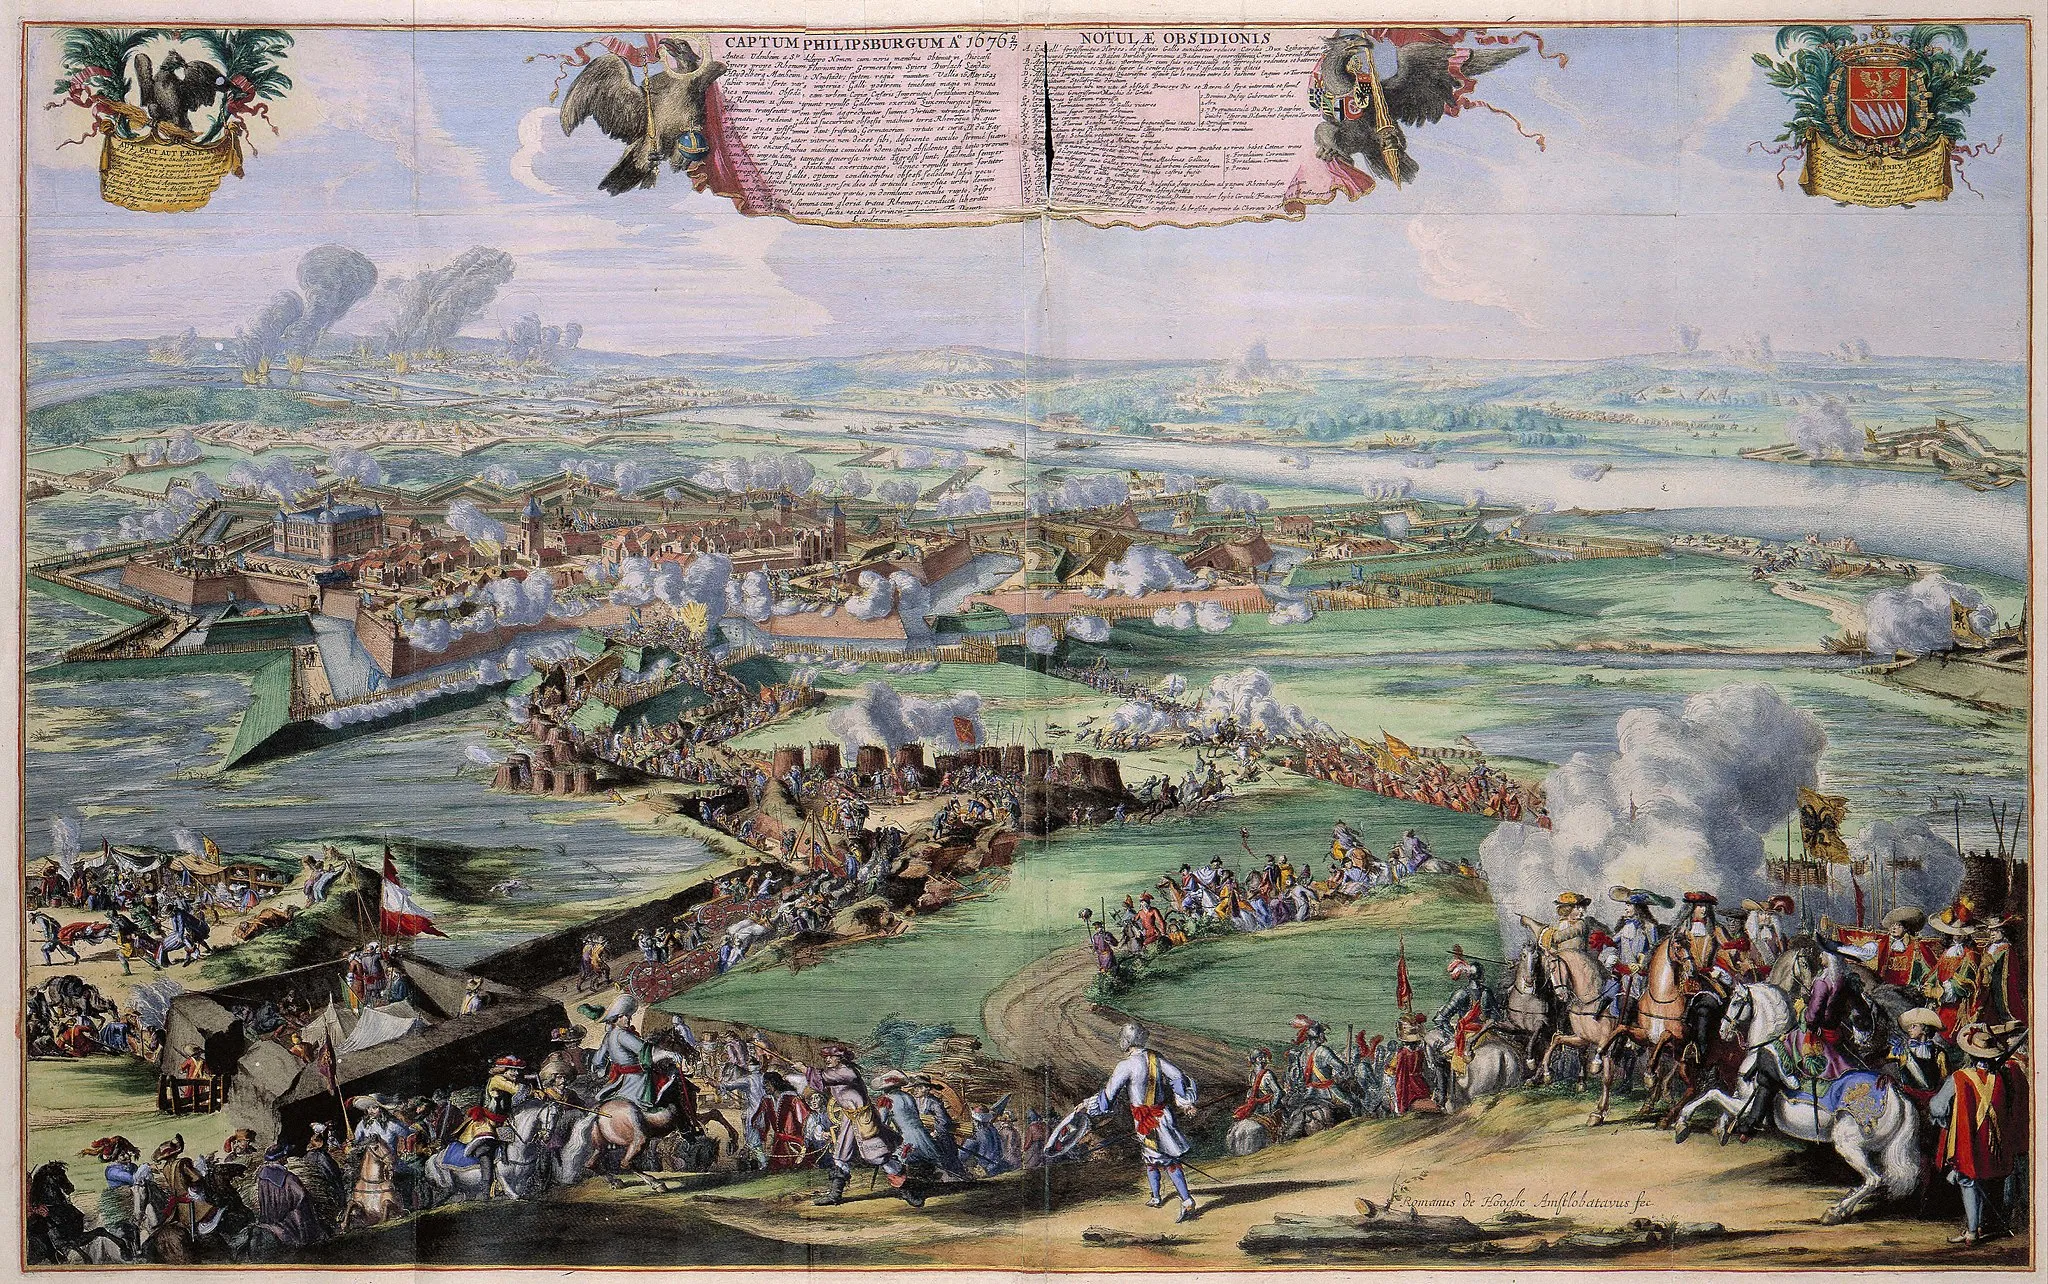 Photo showing: The Dutch Republic waged war with France and England between 1672 en 1678. Though the Republiek settled for peace with England in 1674, the war with France would last another four years. During this war the siege of the German castle Philipsburg took place. Philipsburg was conquered by the Imperial army under field marshall Charles of Lorraine on 17 September 1676.